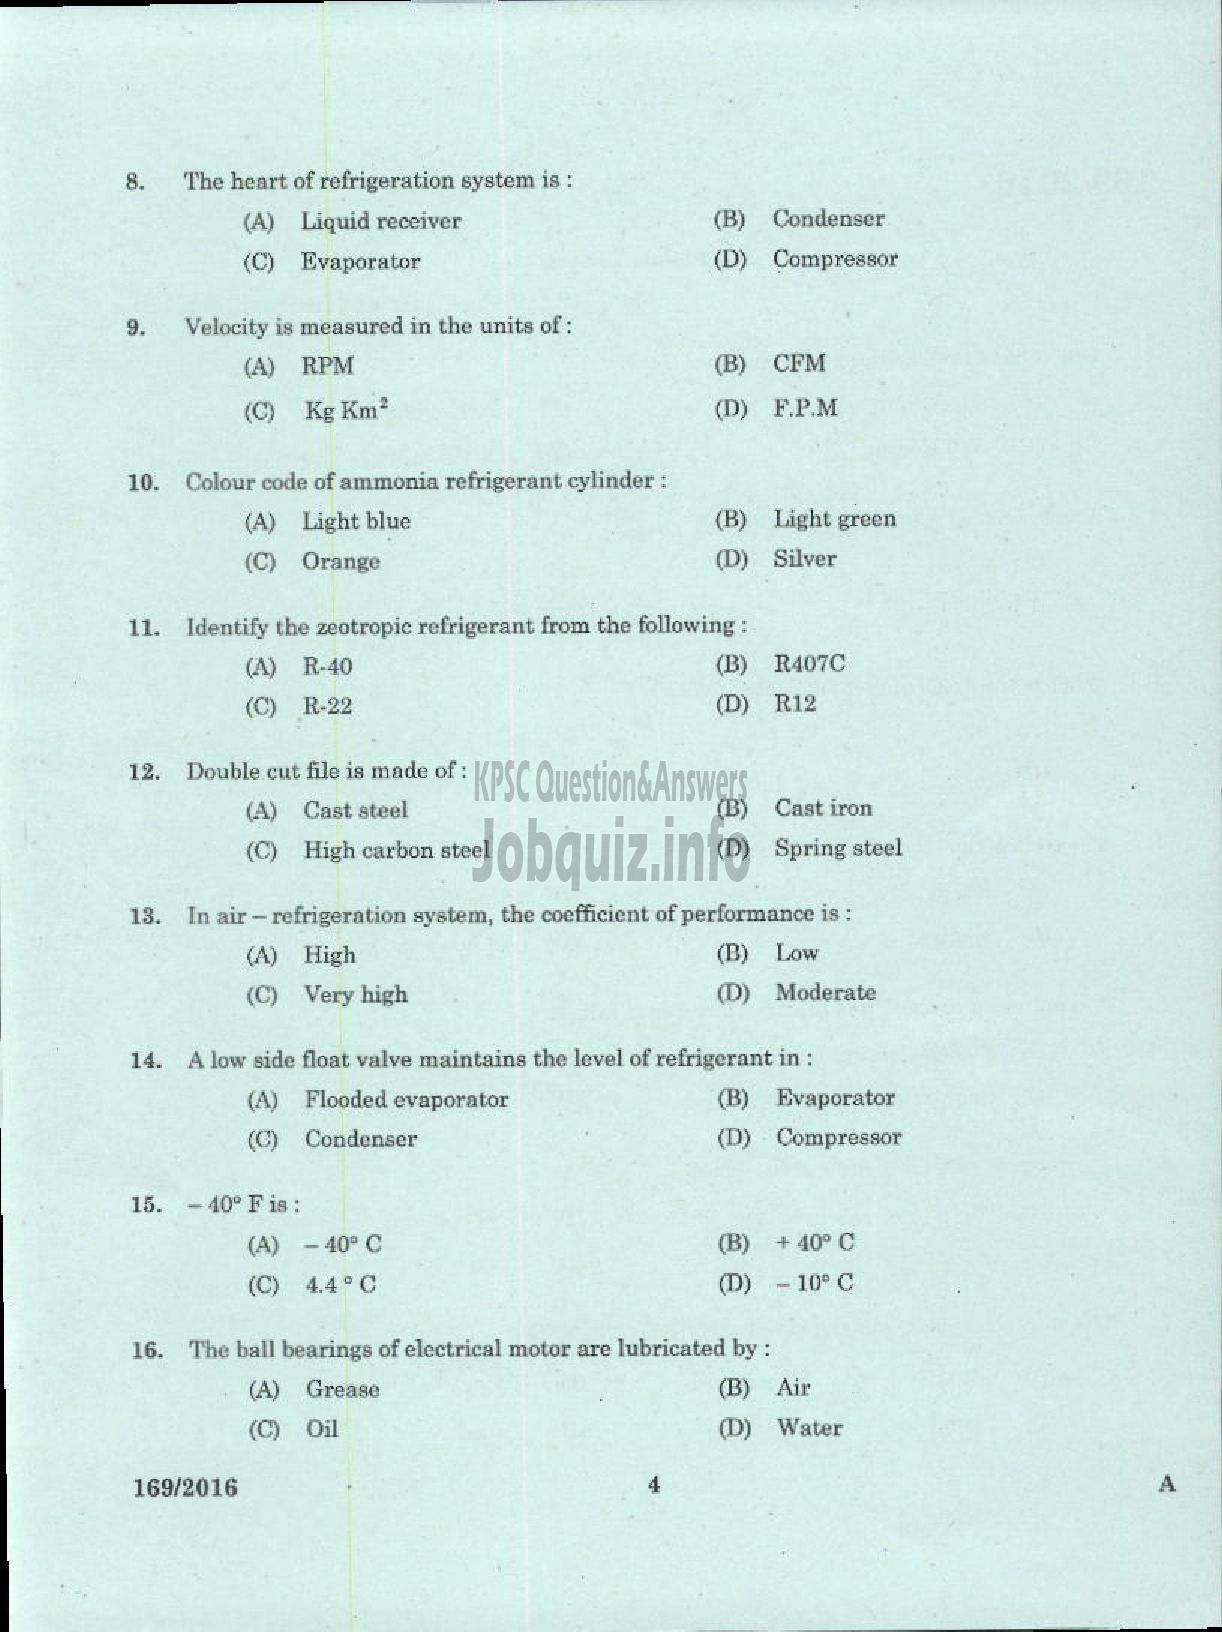 Kerala PSC Question Paper - TRADESMAN REFRIGERATION AND AIR CONDITIONING TECHNICAL EDUCATION-2